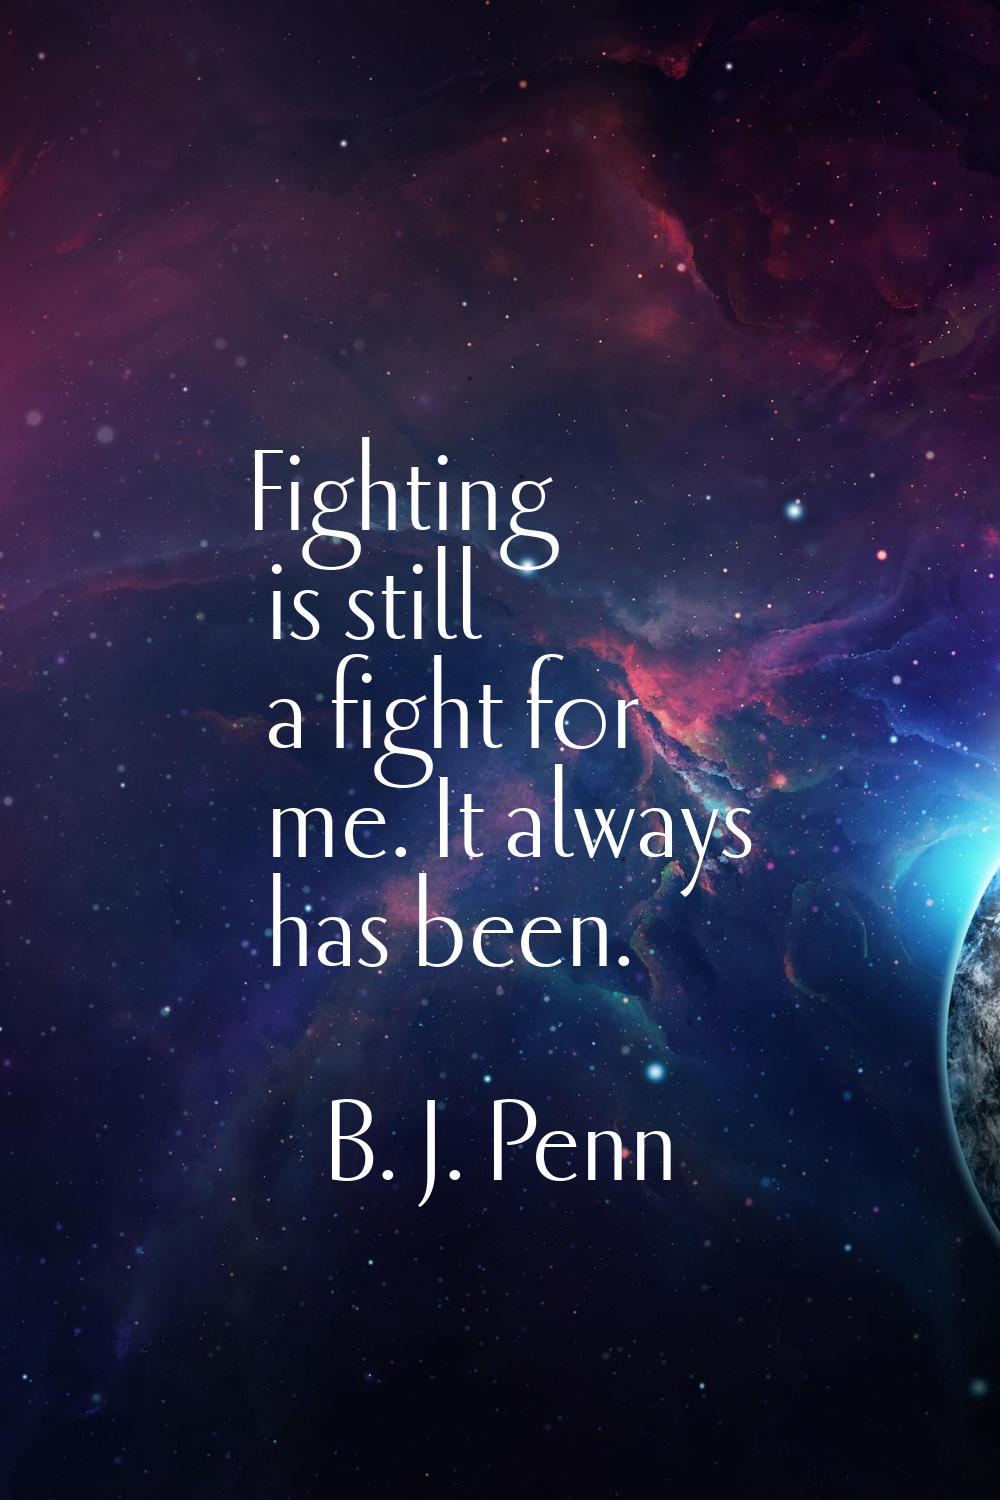 Fighting is still a fight for me. It always has been.